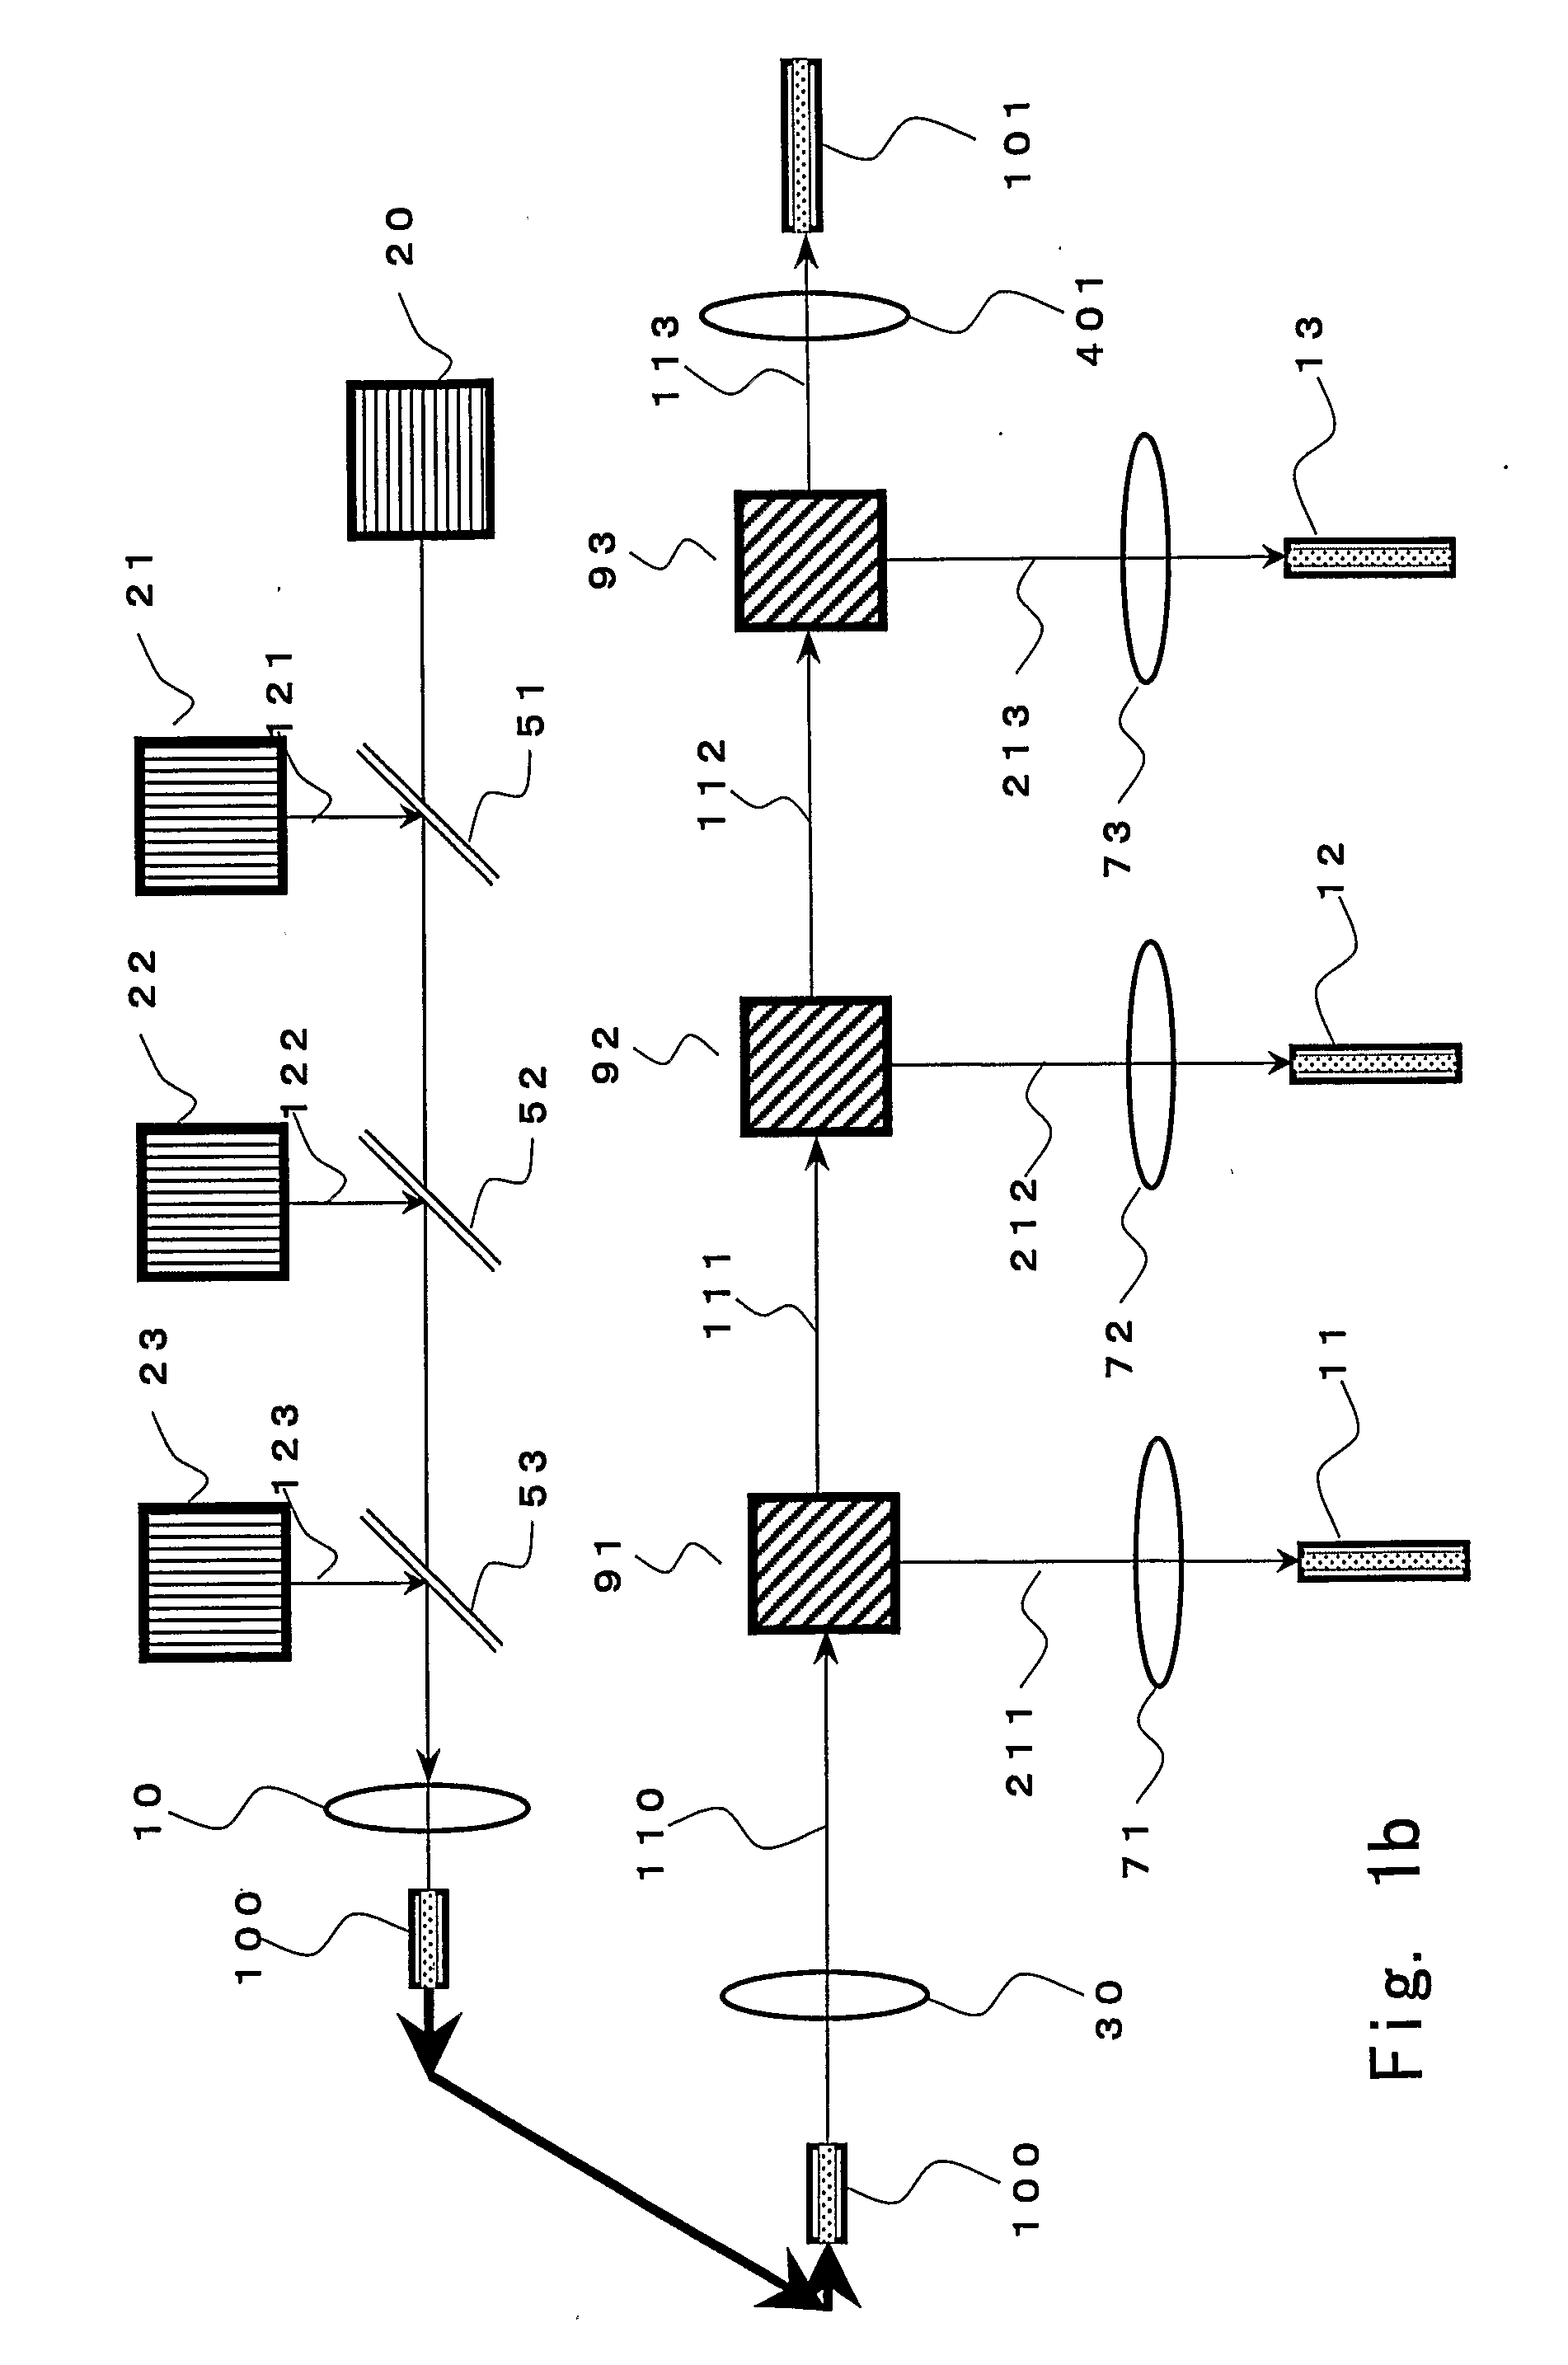 Optically controlled optical-path-switching apparatus, and method of switching optical paths